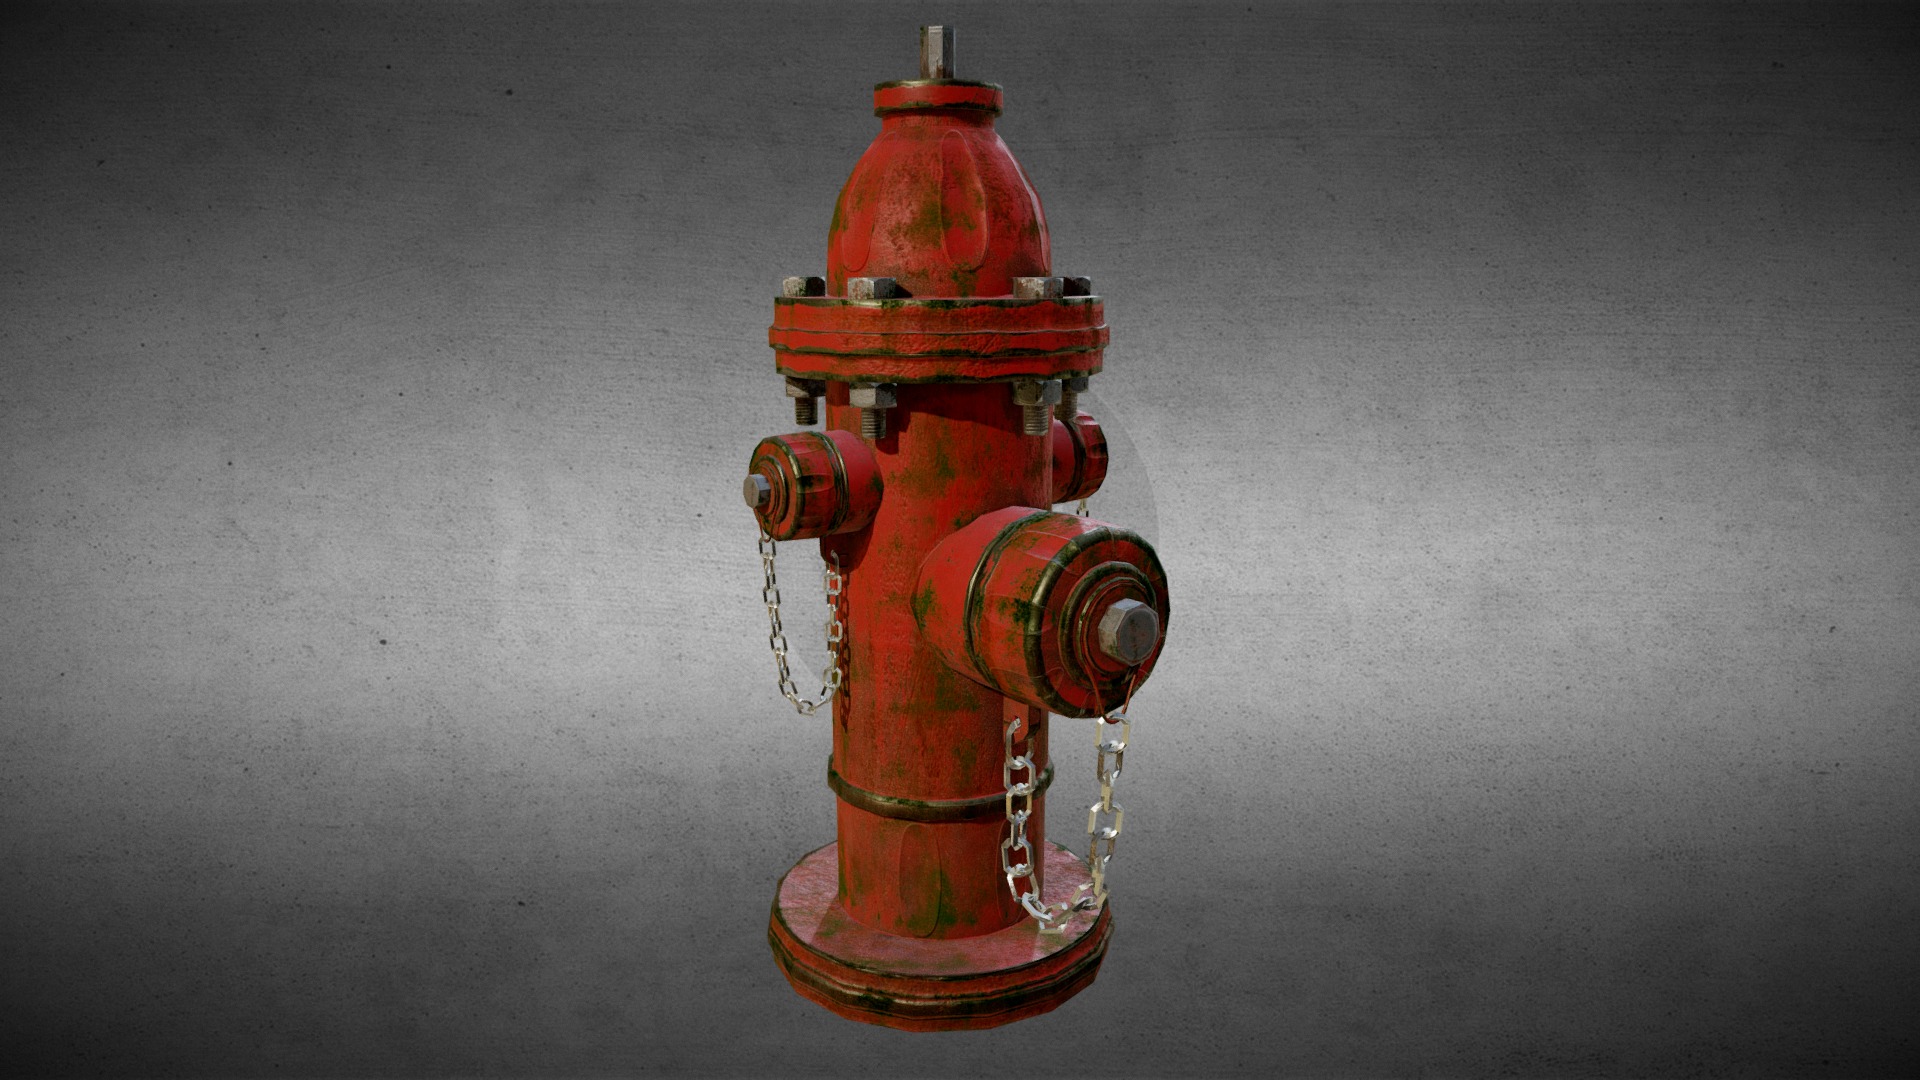 3D model Hydrant in LA - This is a 3D model of the Hydrant in LA. The 3D model is about a red fire hydrant.